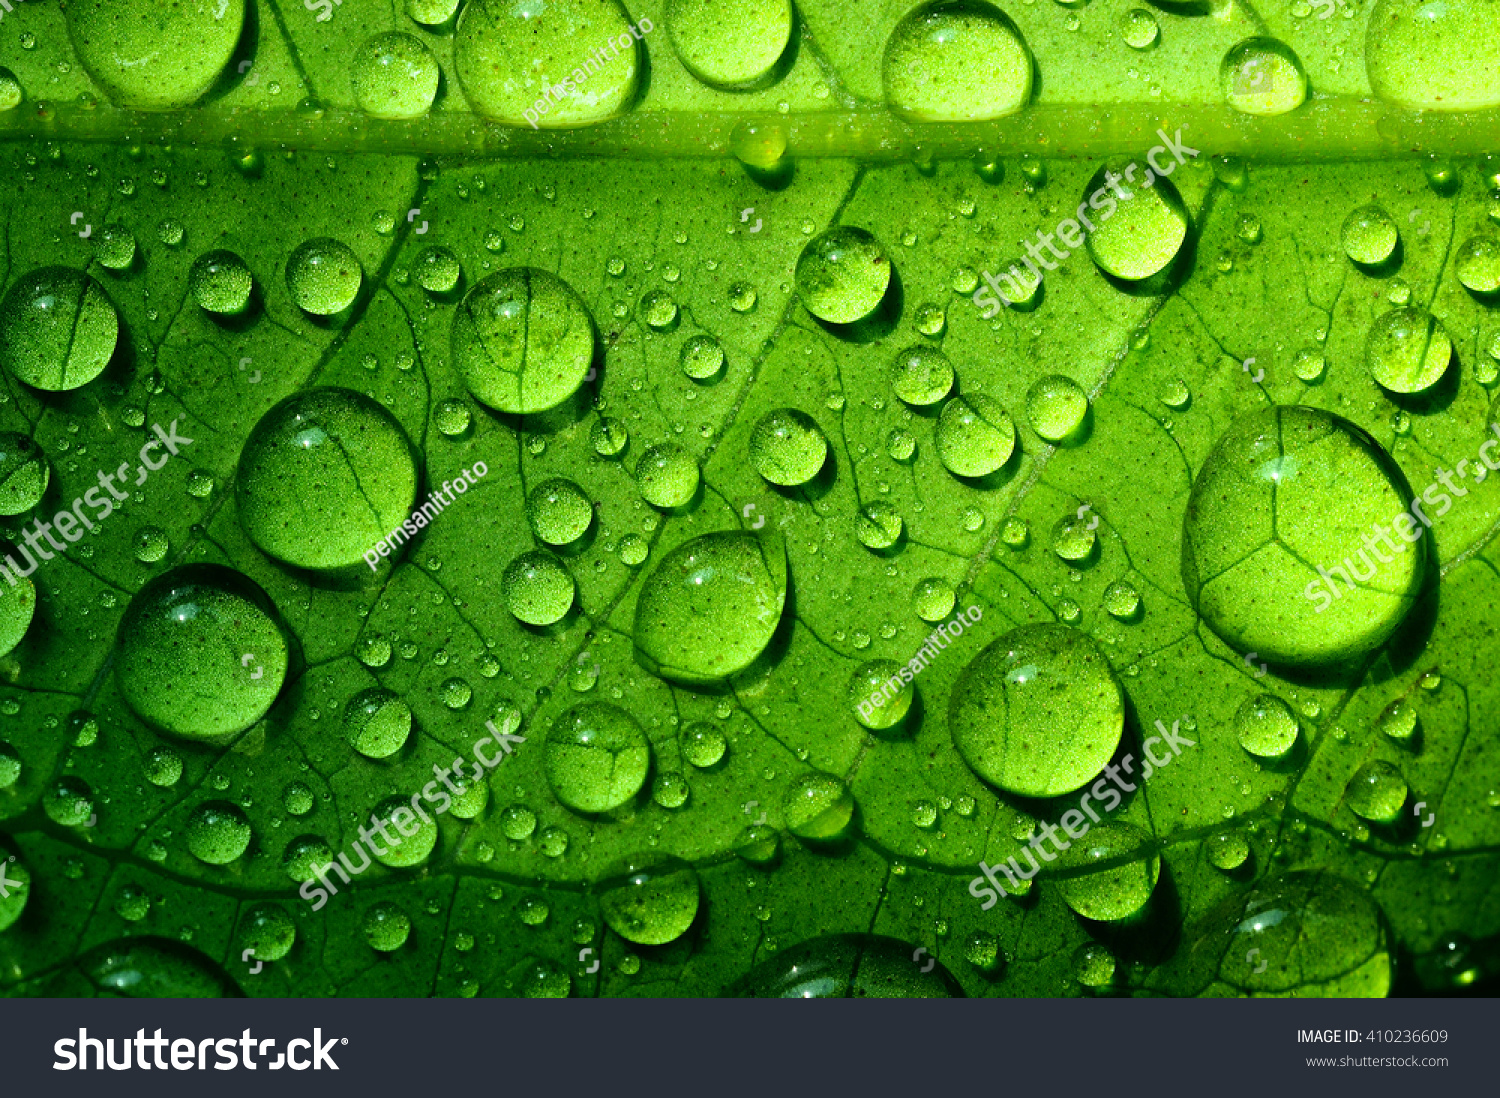 Beautiful green leaf texture with drops of water #410236609